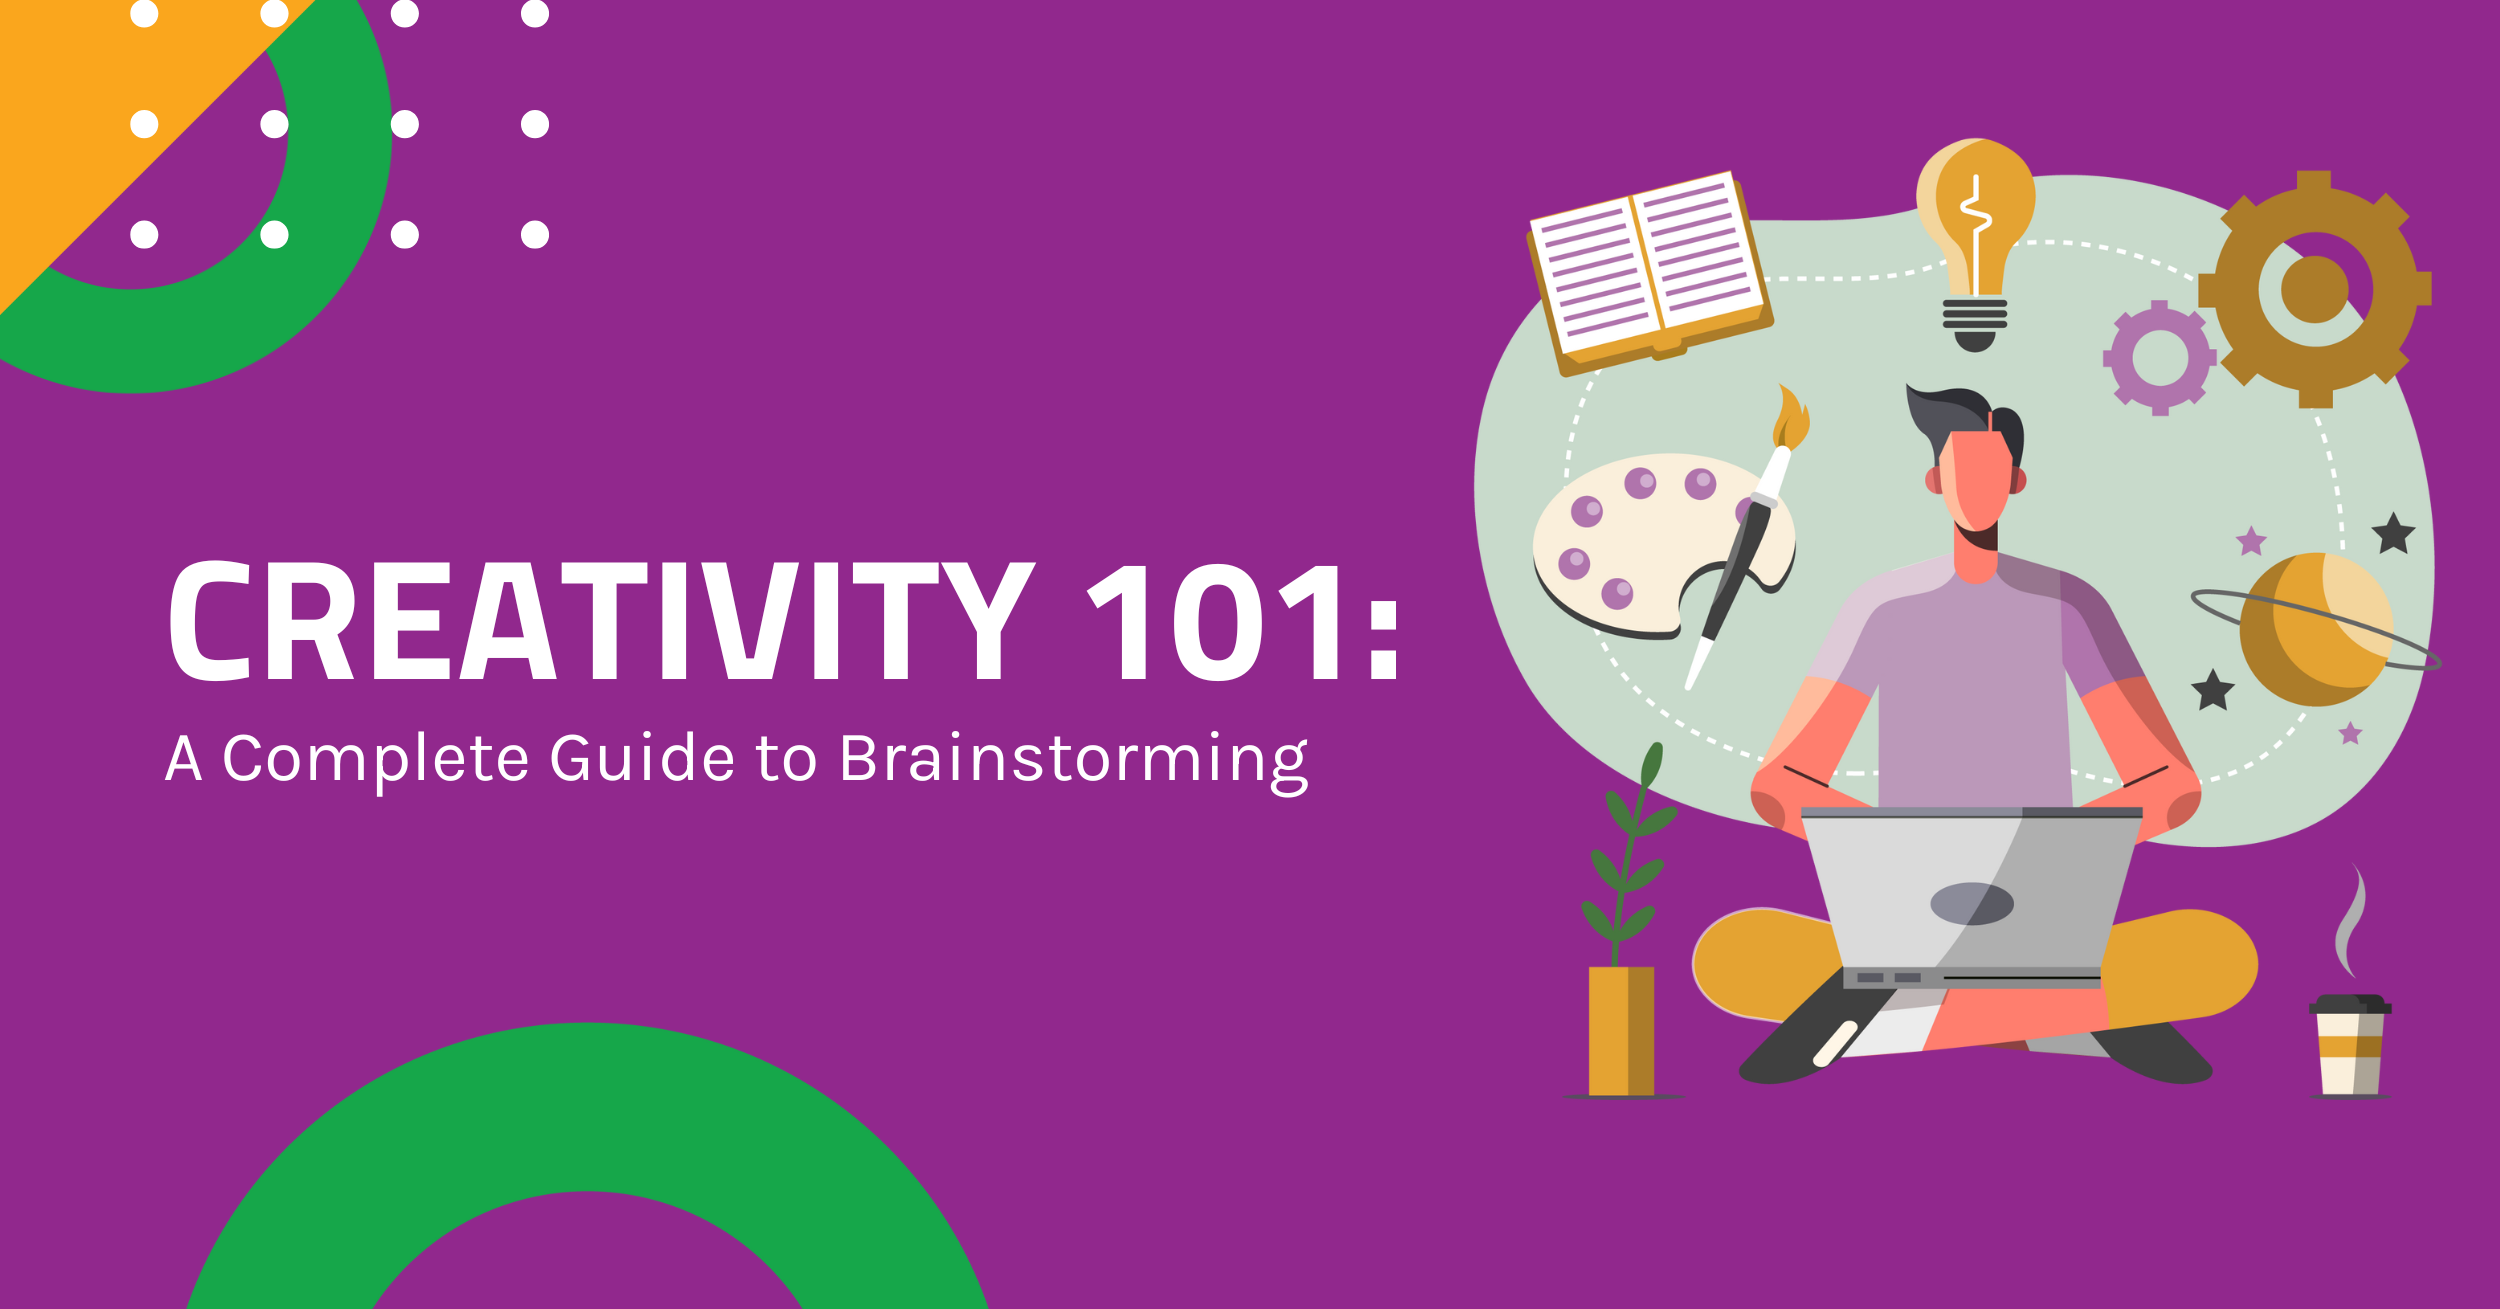 Creativity 101: A Complete Guide to Brainstorming